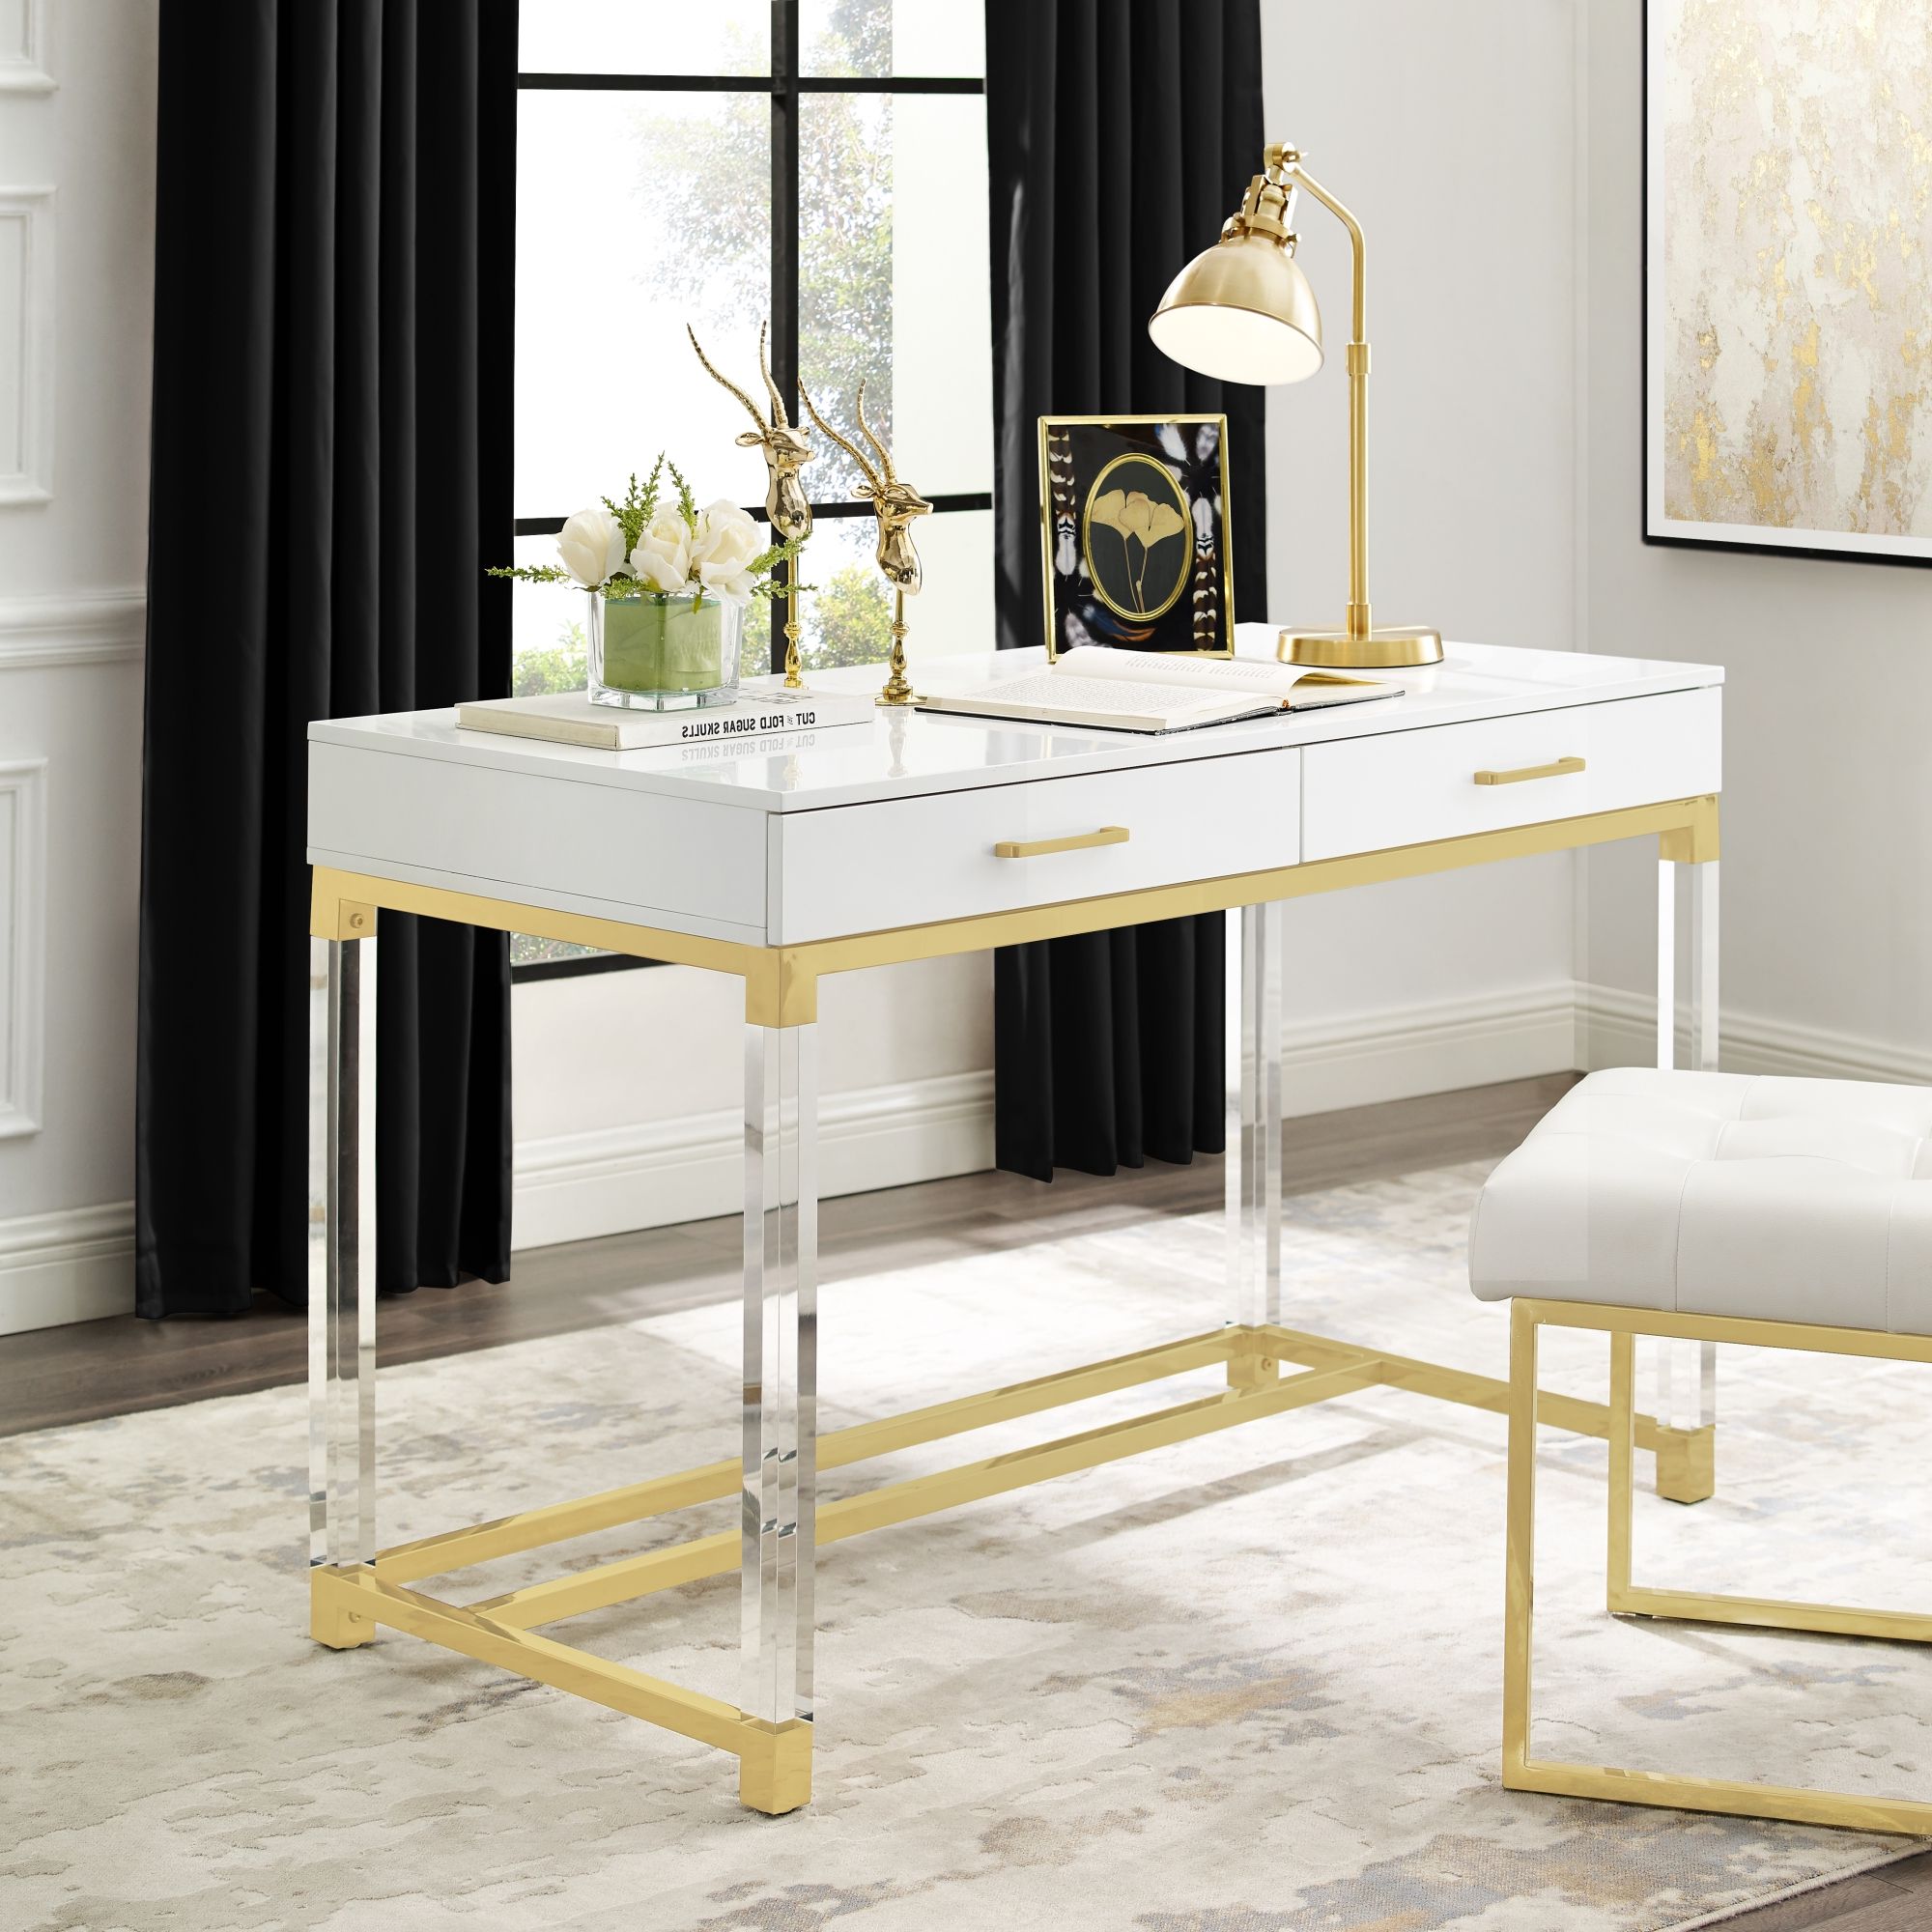 Preferred Inspired Home Alena Writing Desk – 2 Drawers High Gloss Acrylic Legs Throughout White Wood Modern Writing Desks (View 5 of 15)